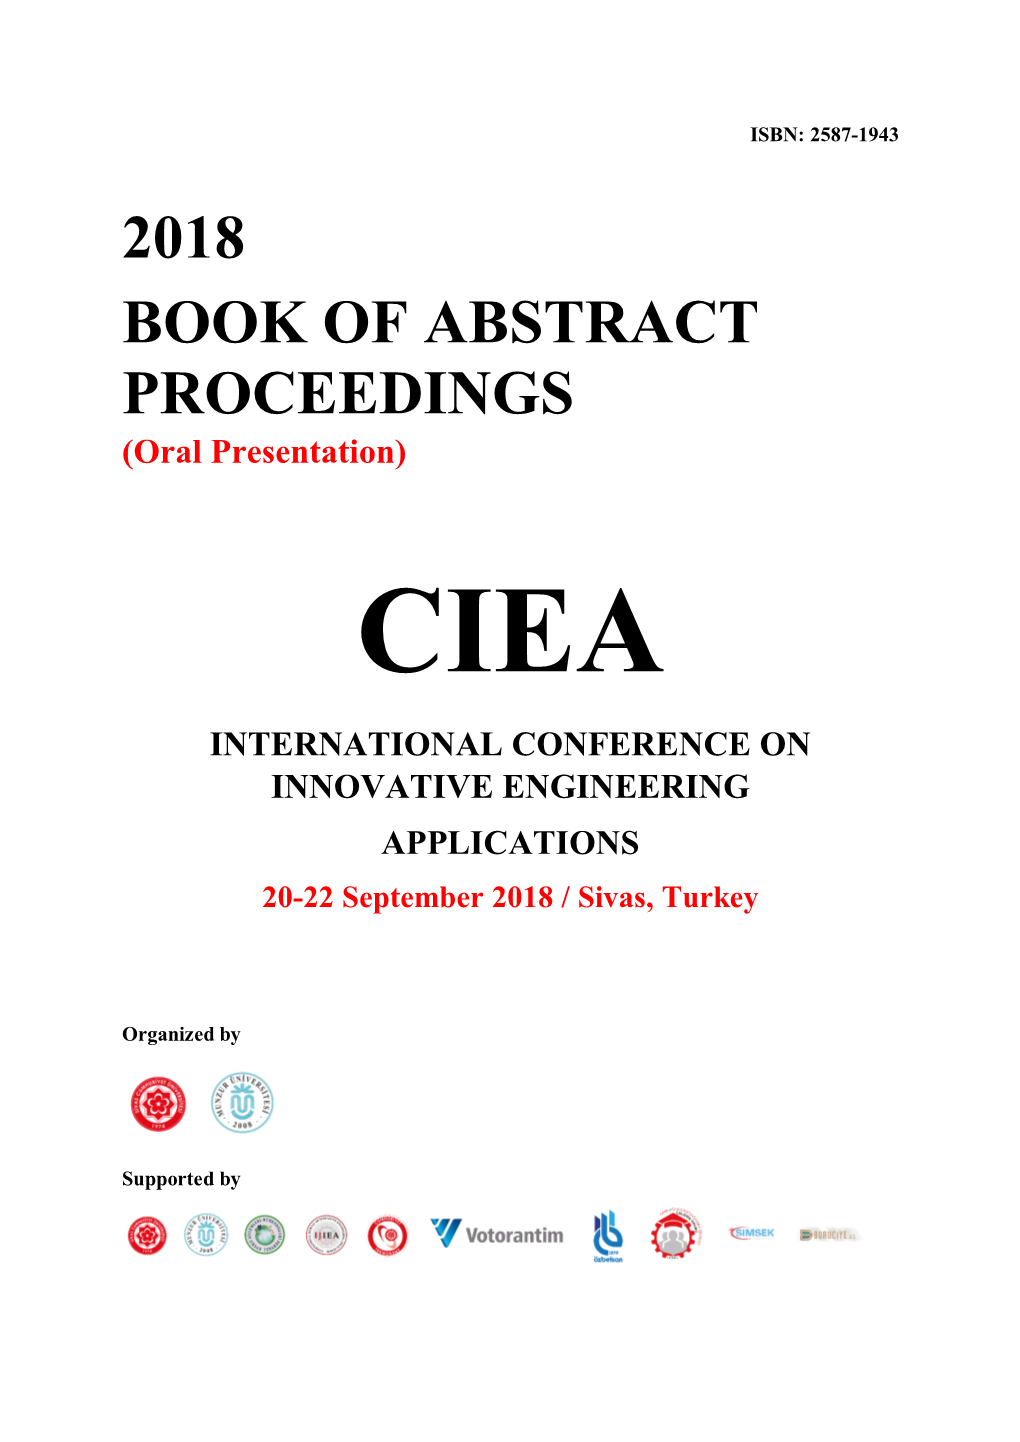 2018 BOOK of ABSTRACT PROCEEDINGS (Oral Presentation) CIEA INTERNATIONAL CONFERENCE on INNOVATIVE ENGINEERING APPLICATIONS 20-22 September 2018 / Sivas, Turkey